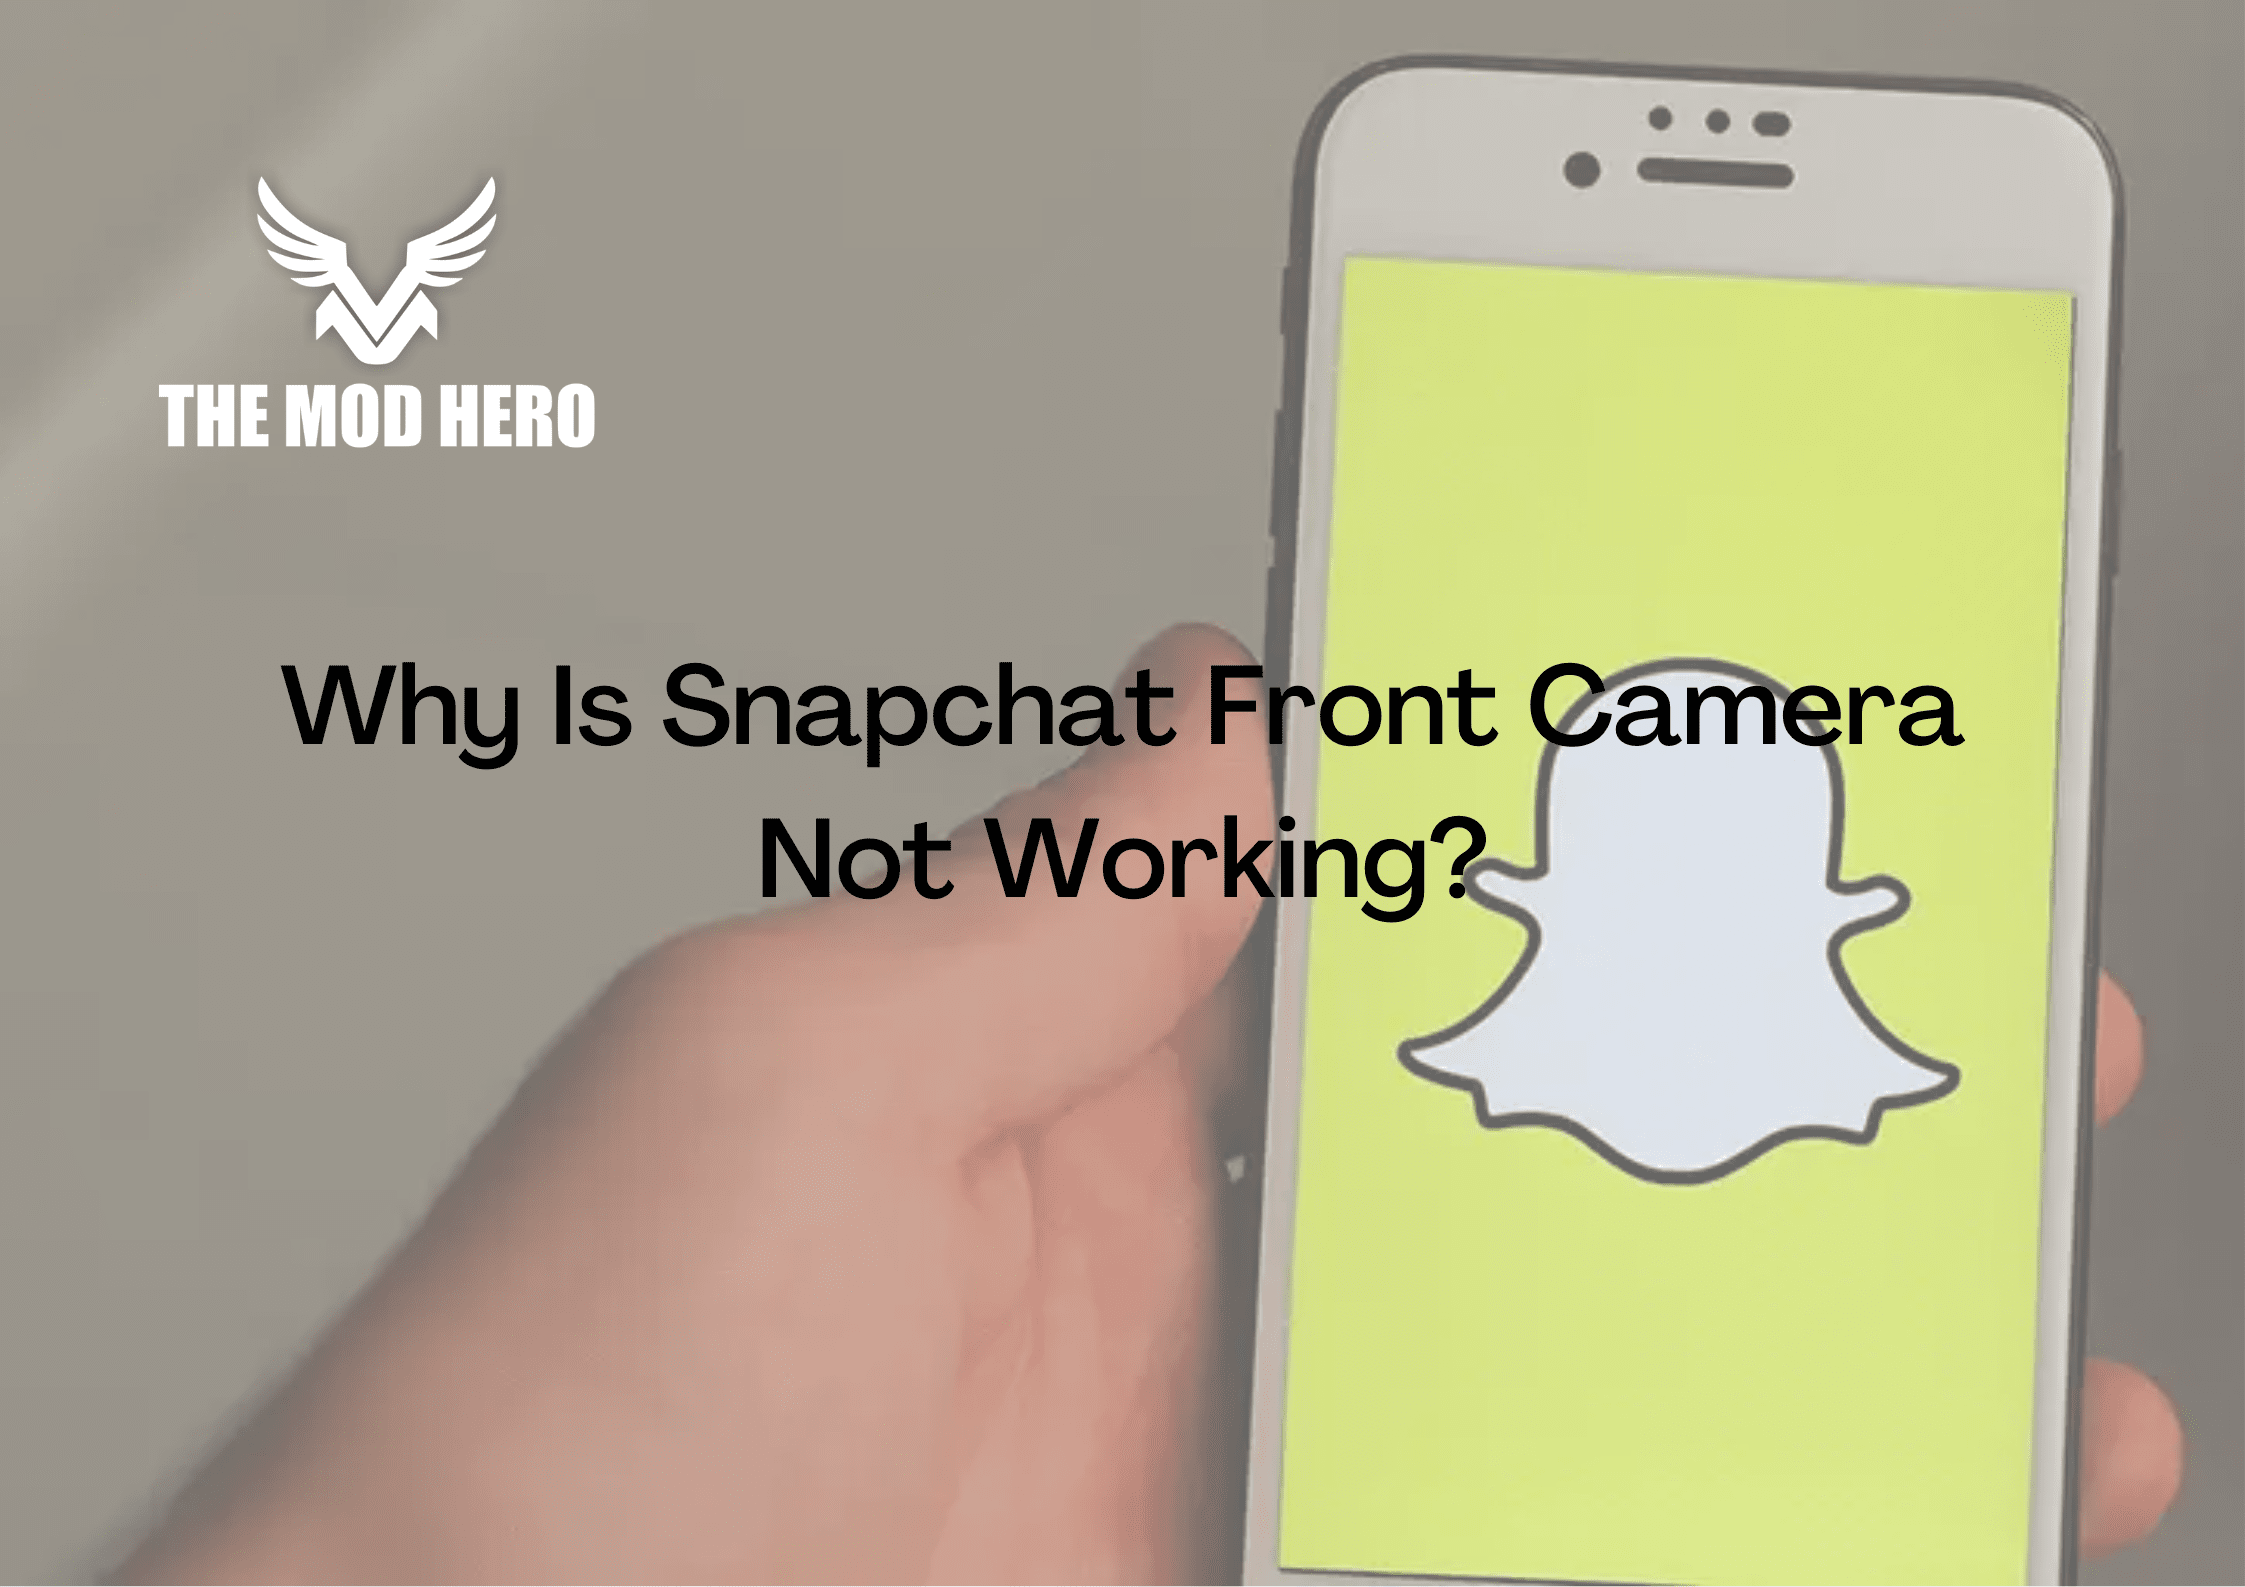 Why Is Snapchat Front Camera Not Working?